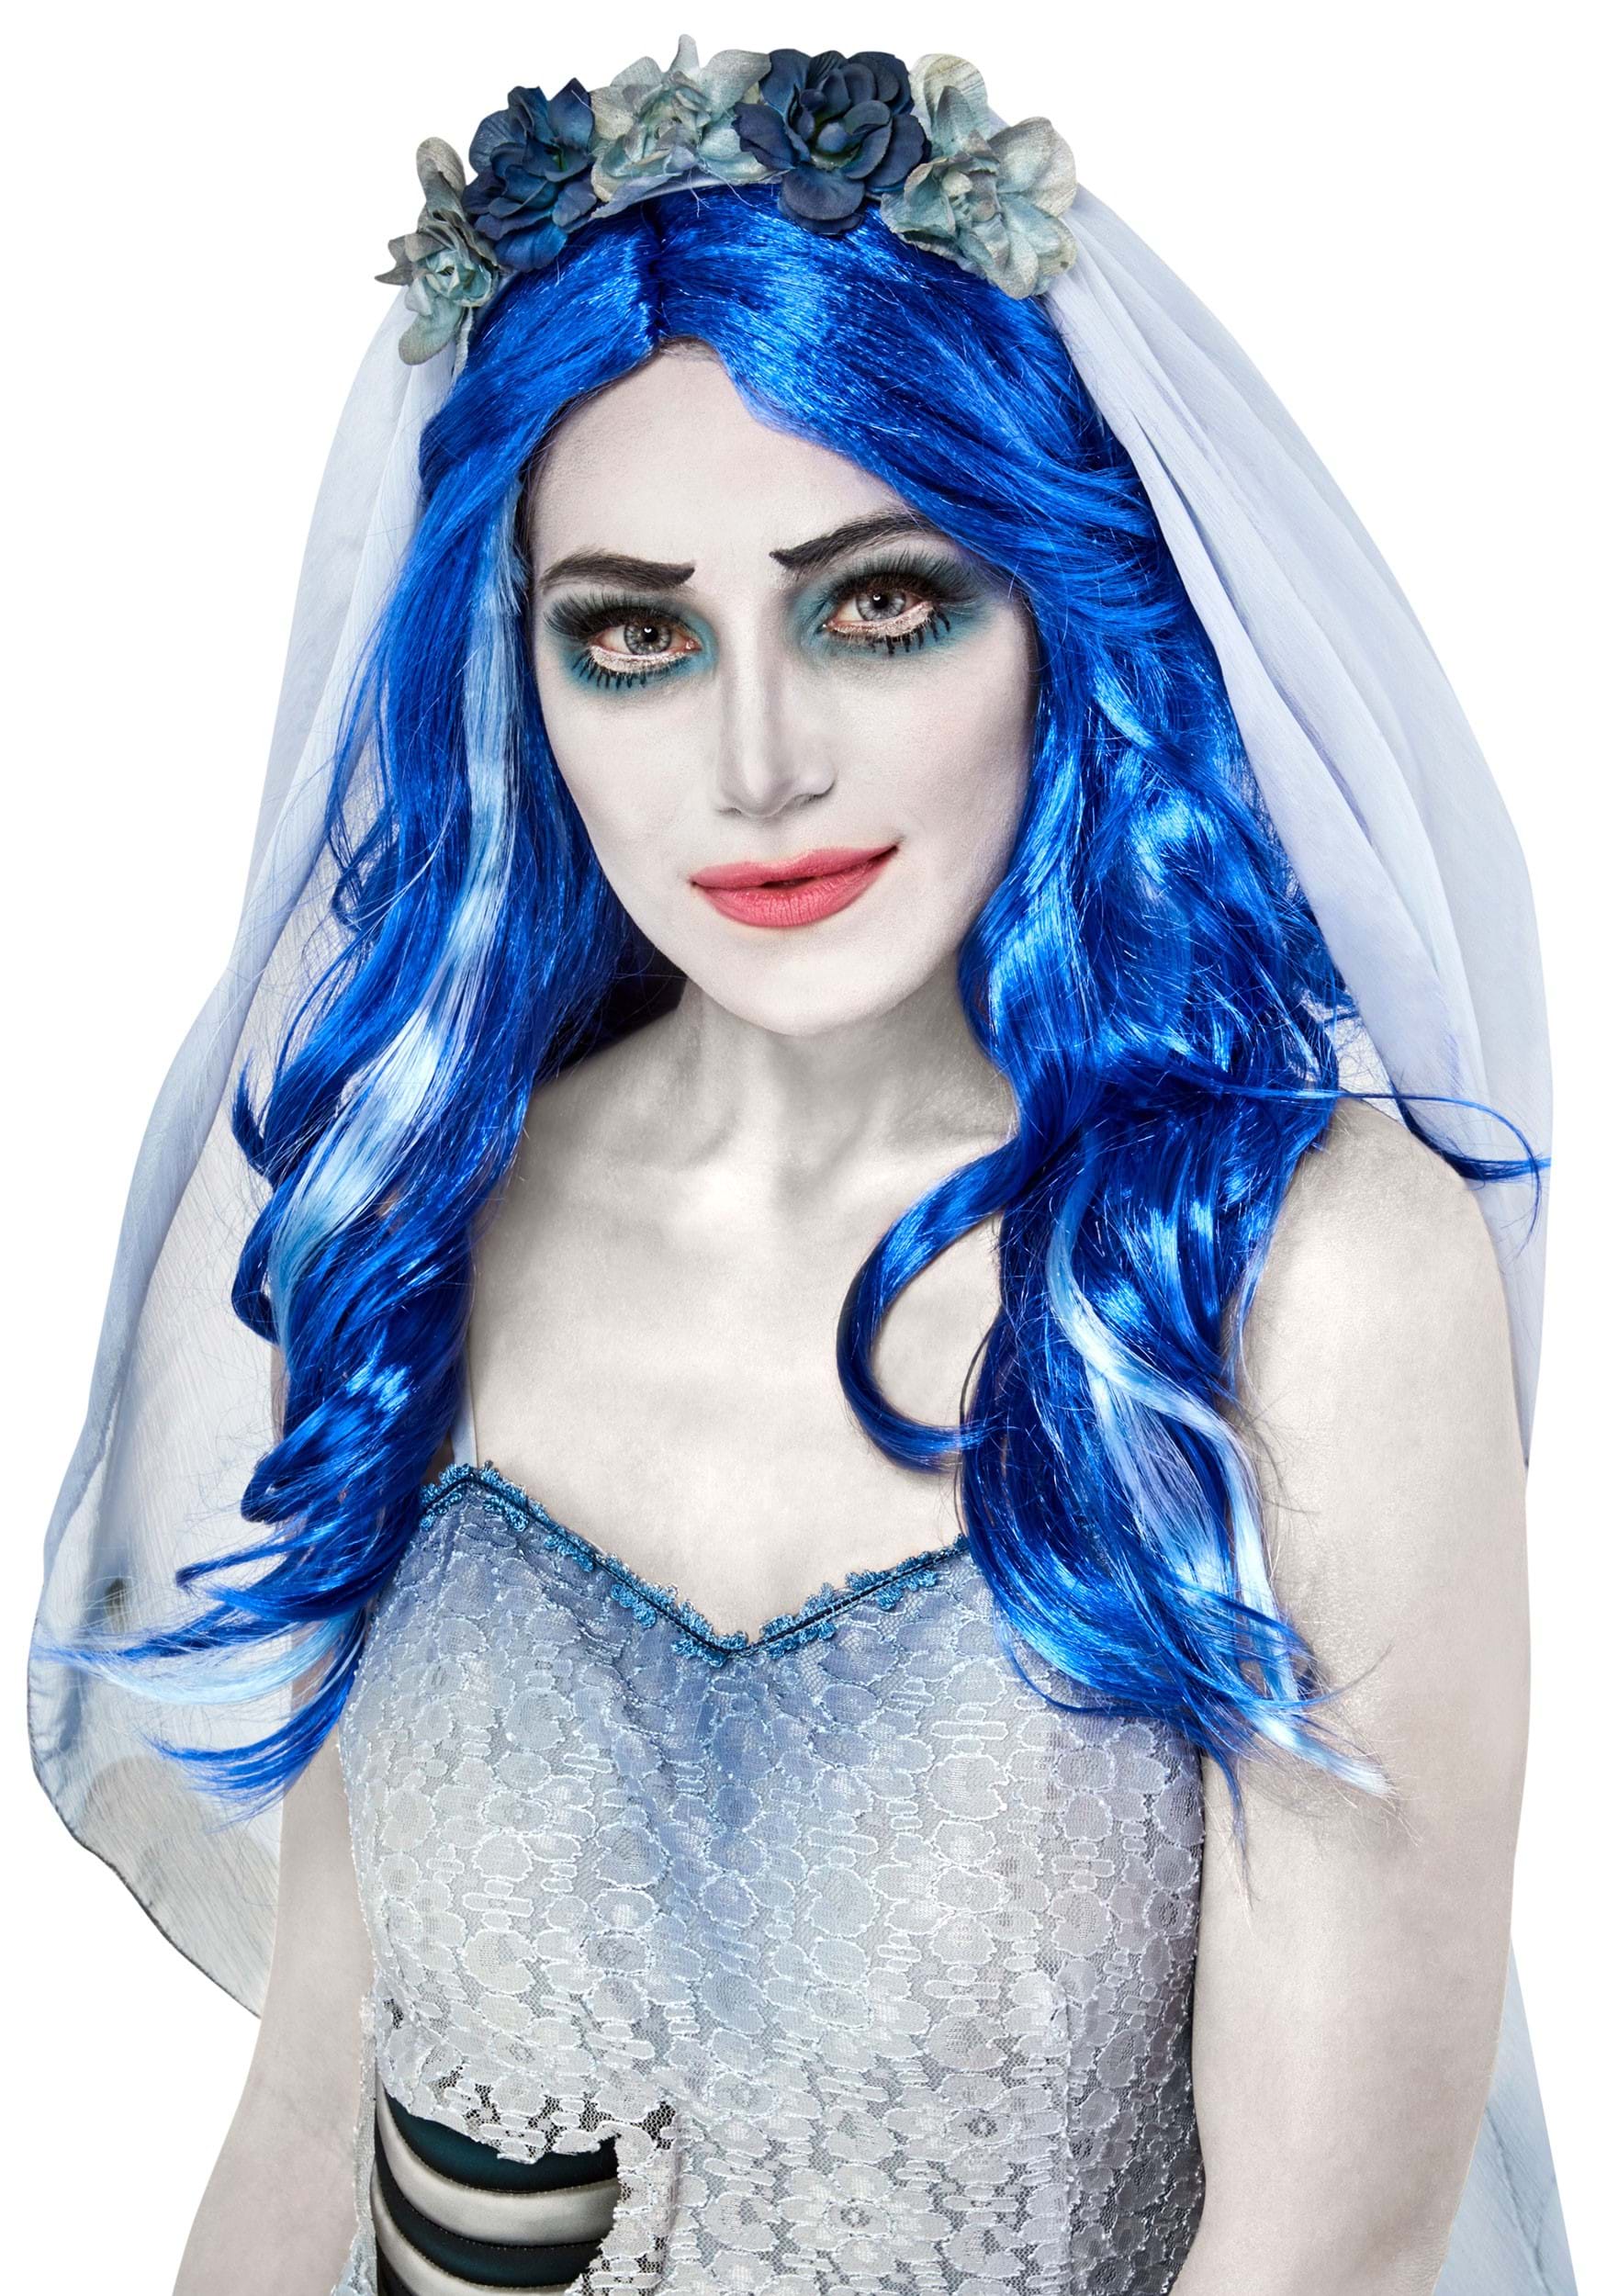 https://images.halloweencostumes.com/products/91906/1-1/womens-corpse-bride-wig.jpg